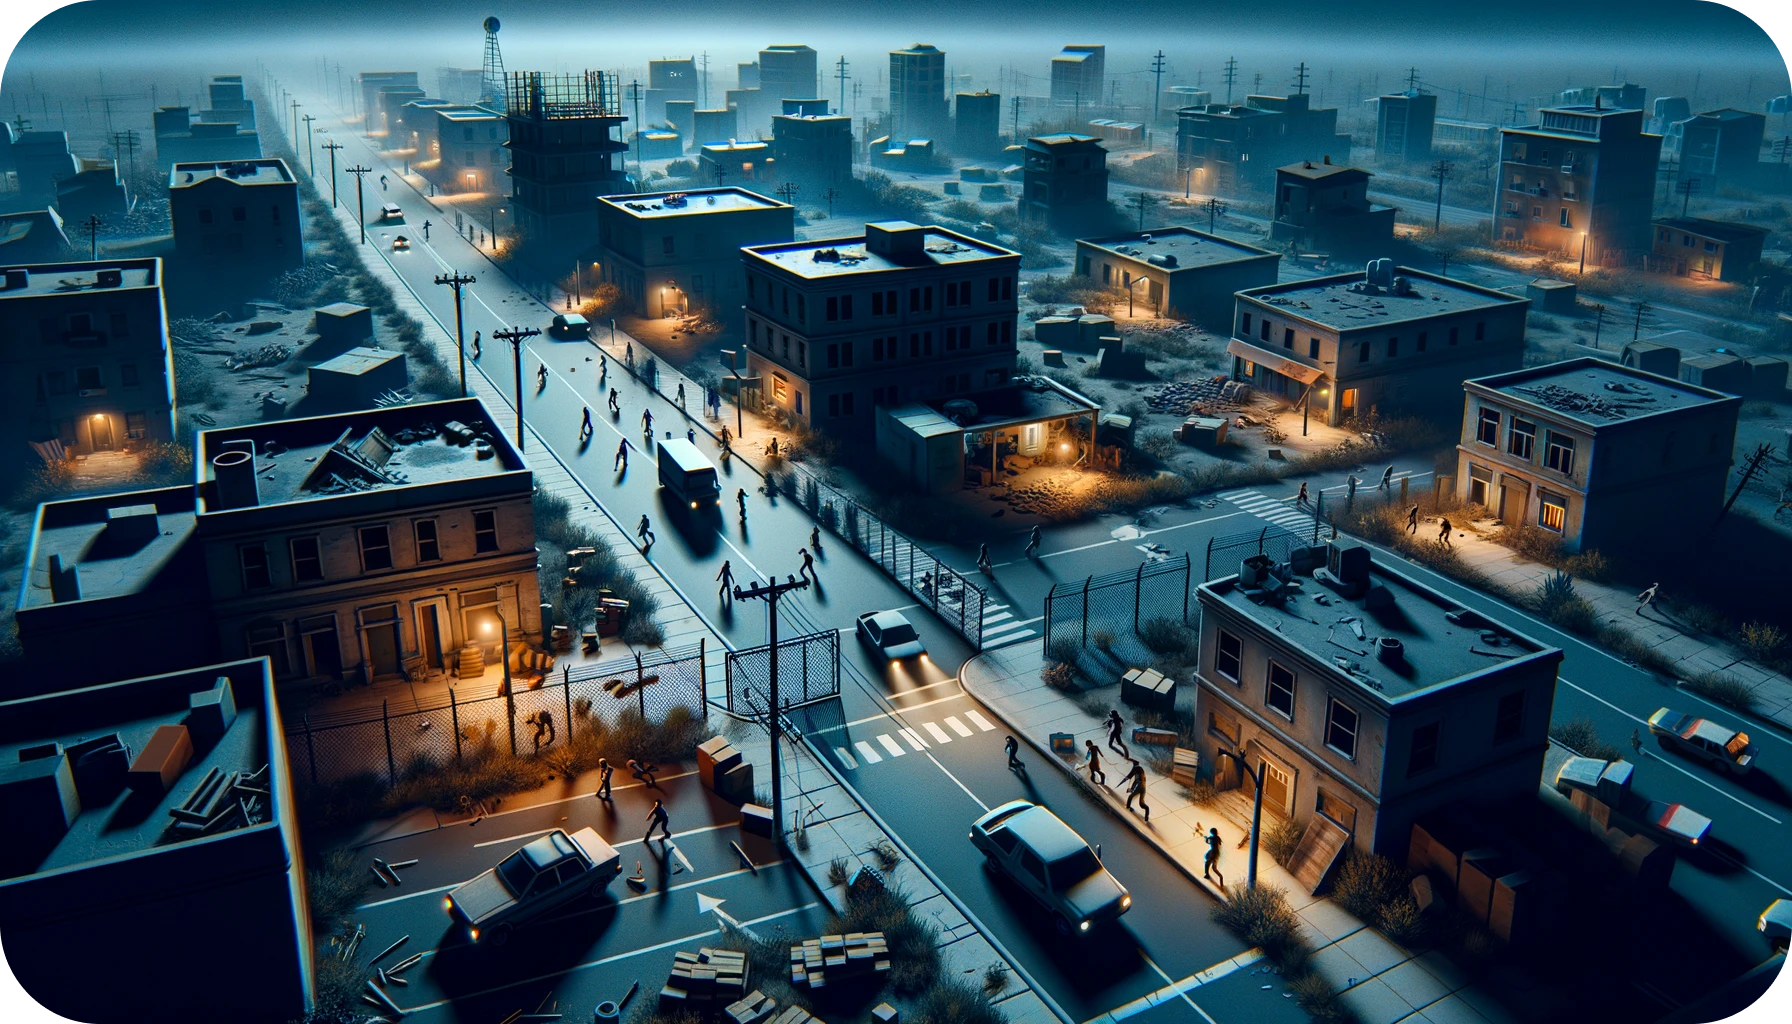 A desolate urban landscape with players fortifying a safehouse as night approaches, hinting at the looming threat of zombies.